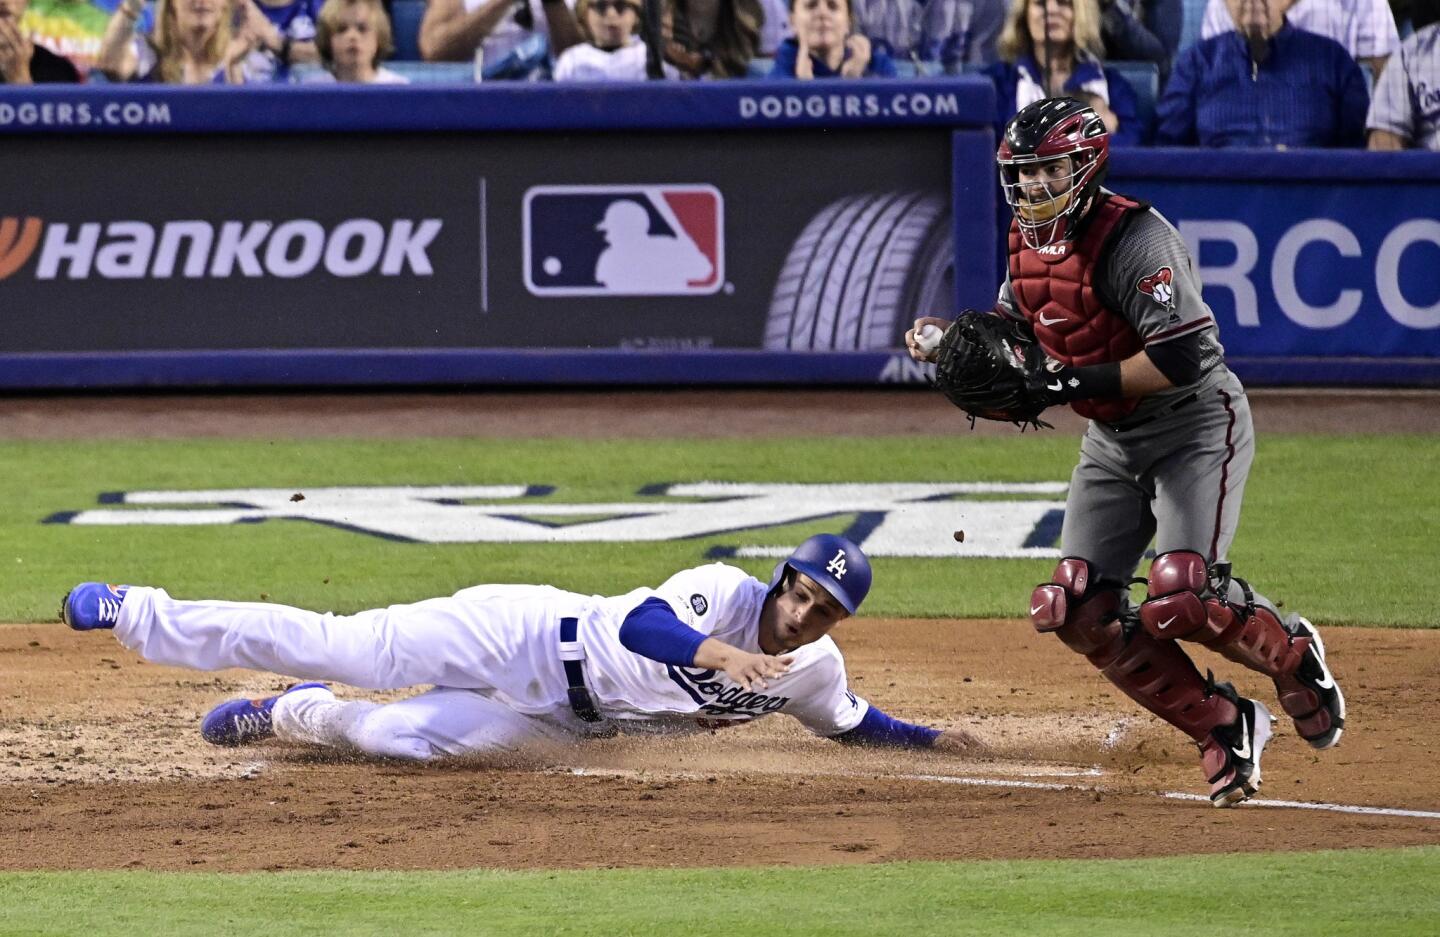 Los Angeles Dodgers' Corey Seager, left, scores on a single by Cody Bellinger as Arizona Diamondbacks catcher Alex Avila takes a late throw during the third inning of a baseball game Saturday, March 30, 2019, in Los Angeles. (AP Photo/Mark J. Terrill)